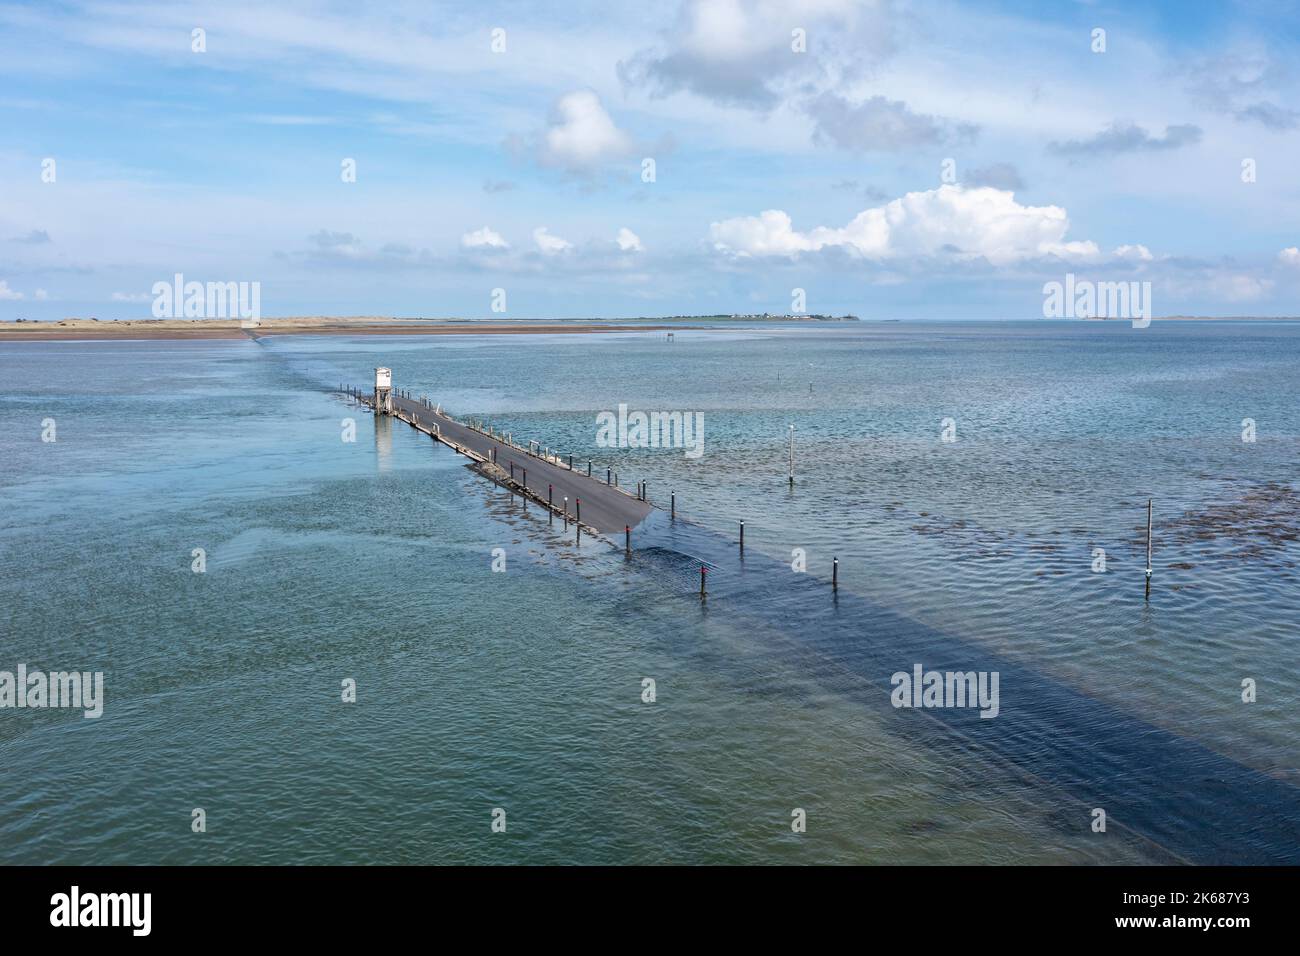 holy island causeway and refuge approaching high tide daytime no people Stock Photo